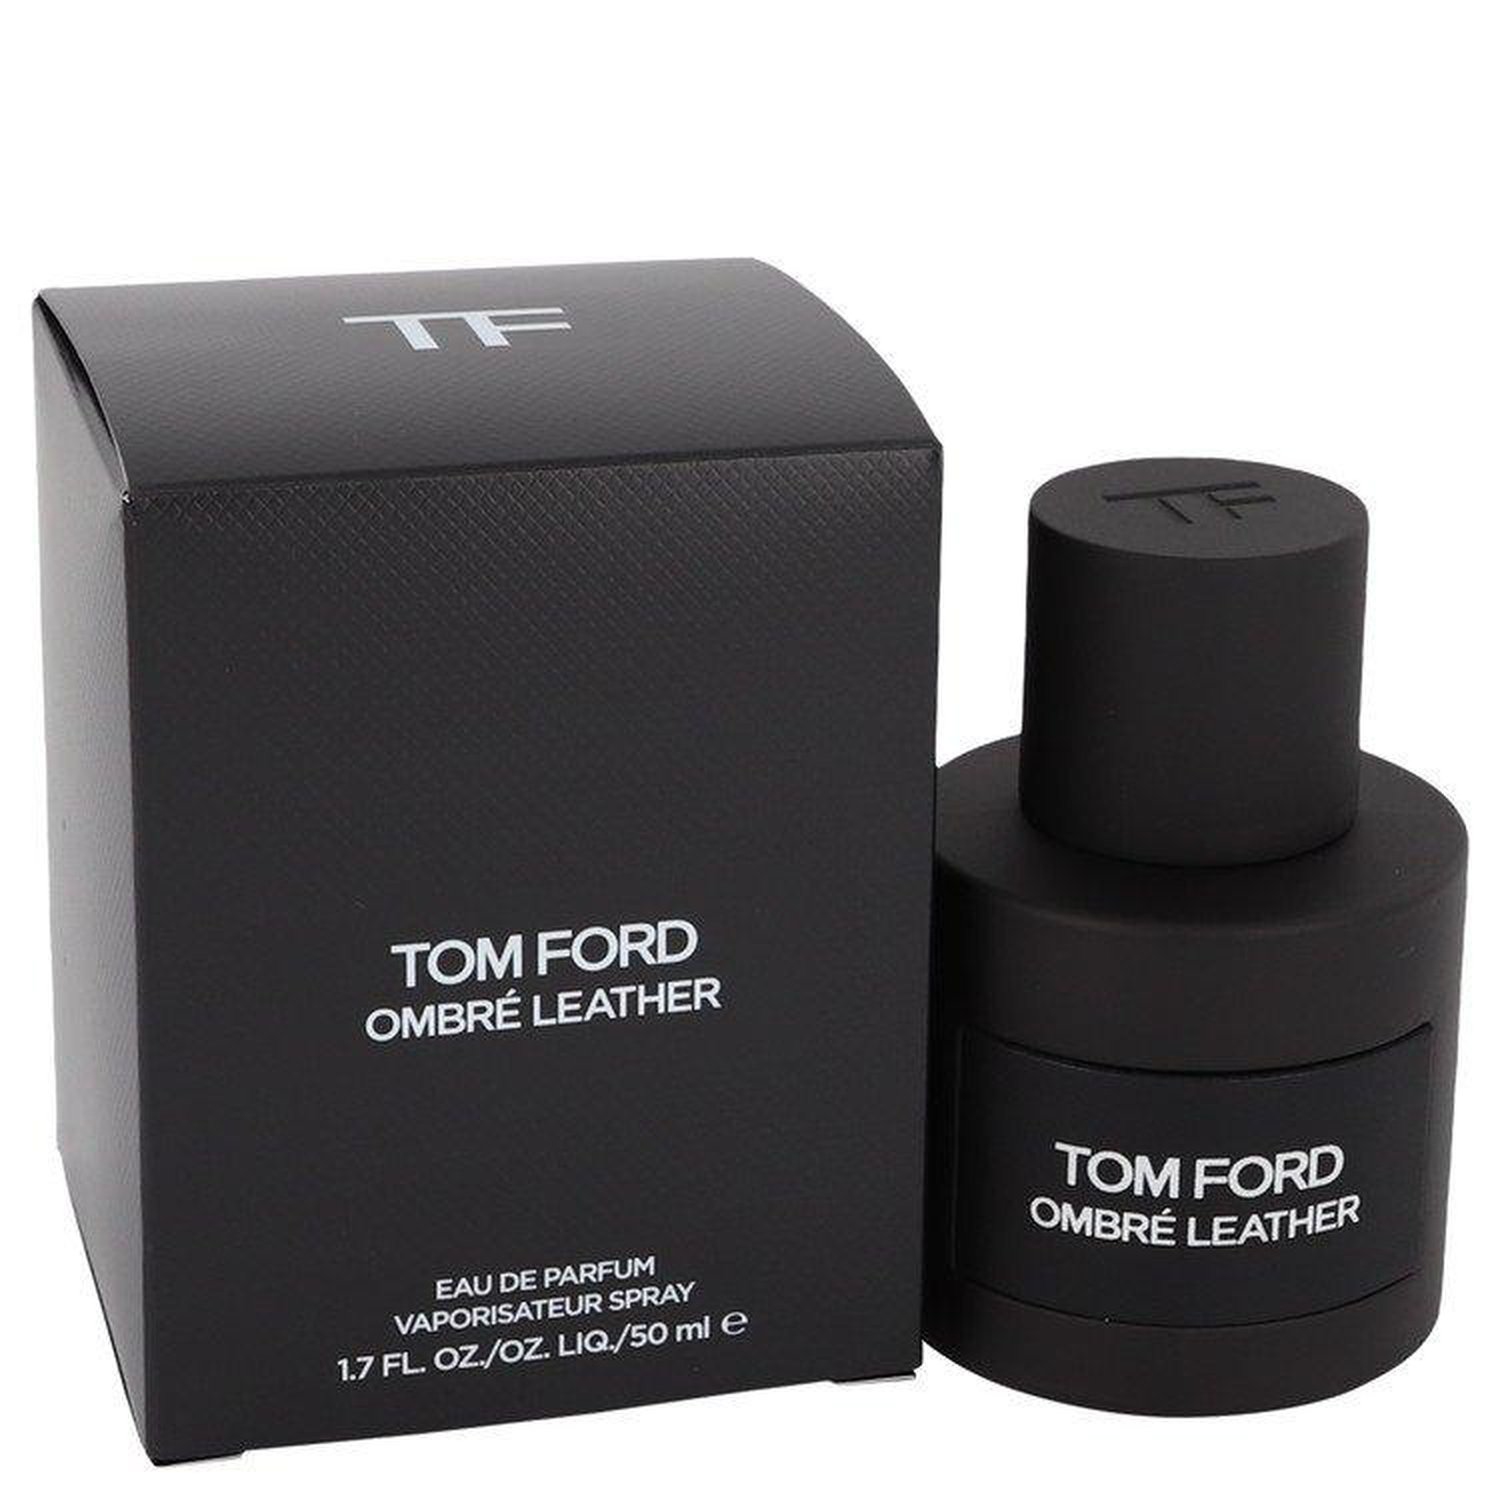 Tom Ford Ombre Leather Man EDP M 50ml Boxed | Best Buy Canada